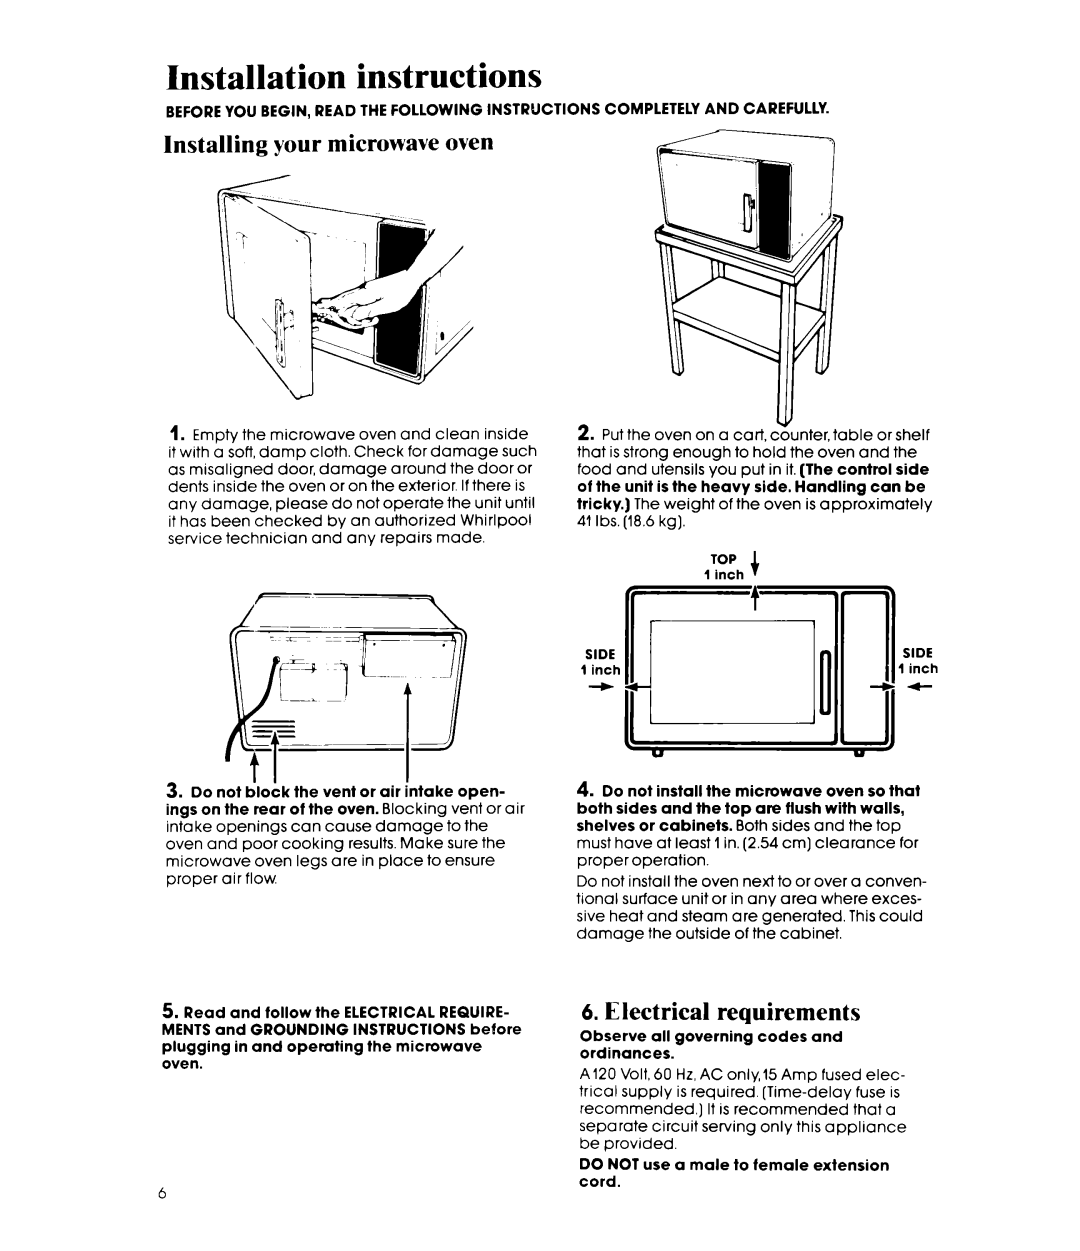 Whirlpool MW3000XM manual Installation instructions, Installing your microwave oven, Electrical requirements 